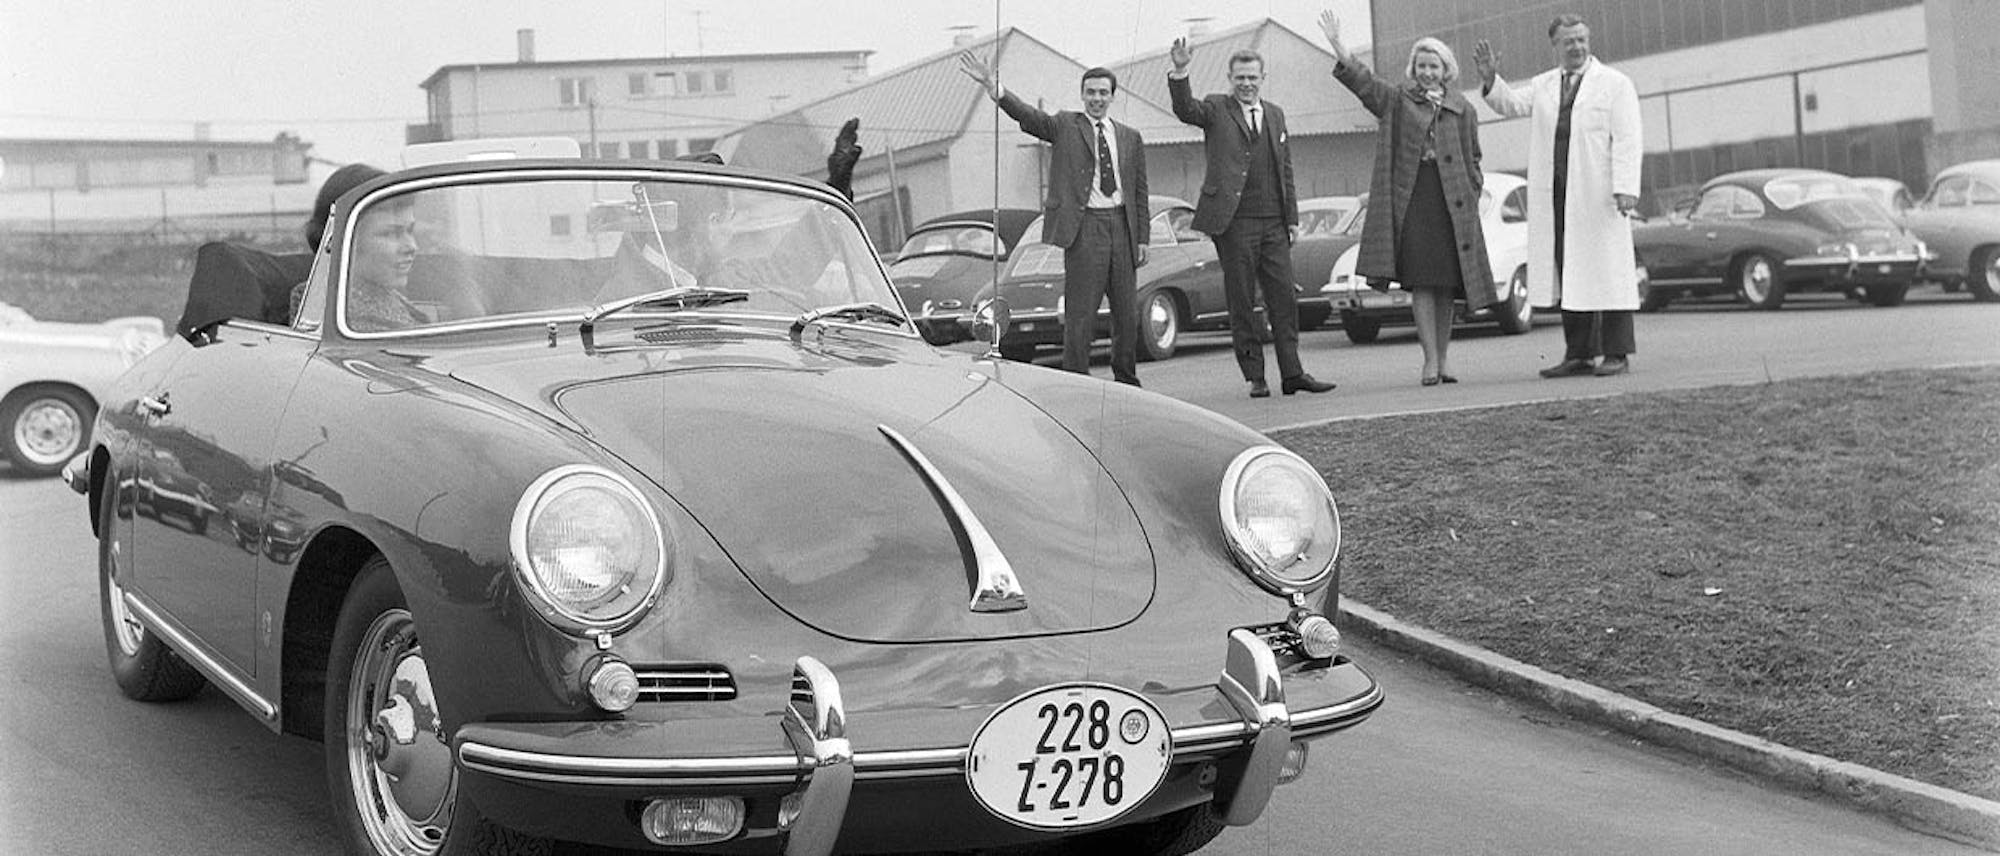 Black and white photo of Porsche leaving factory in early 1960s